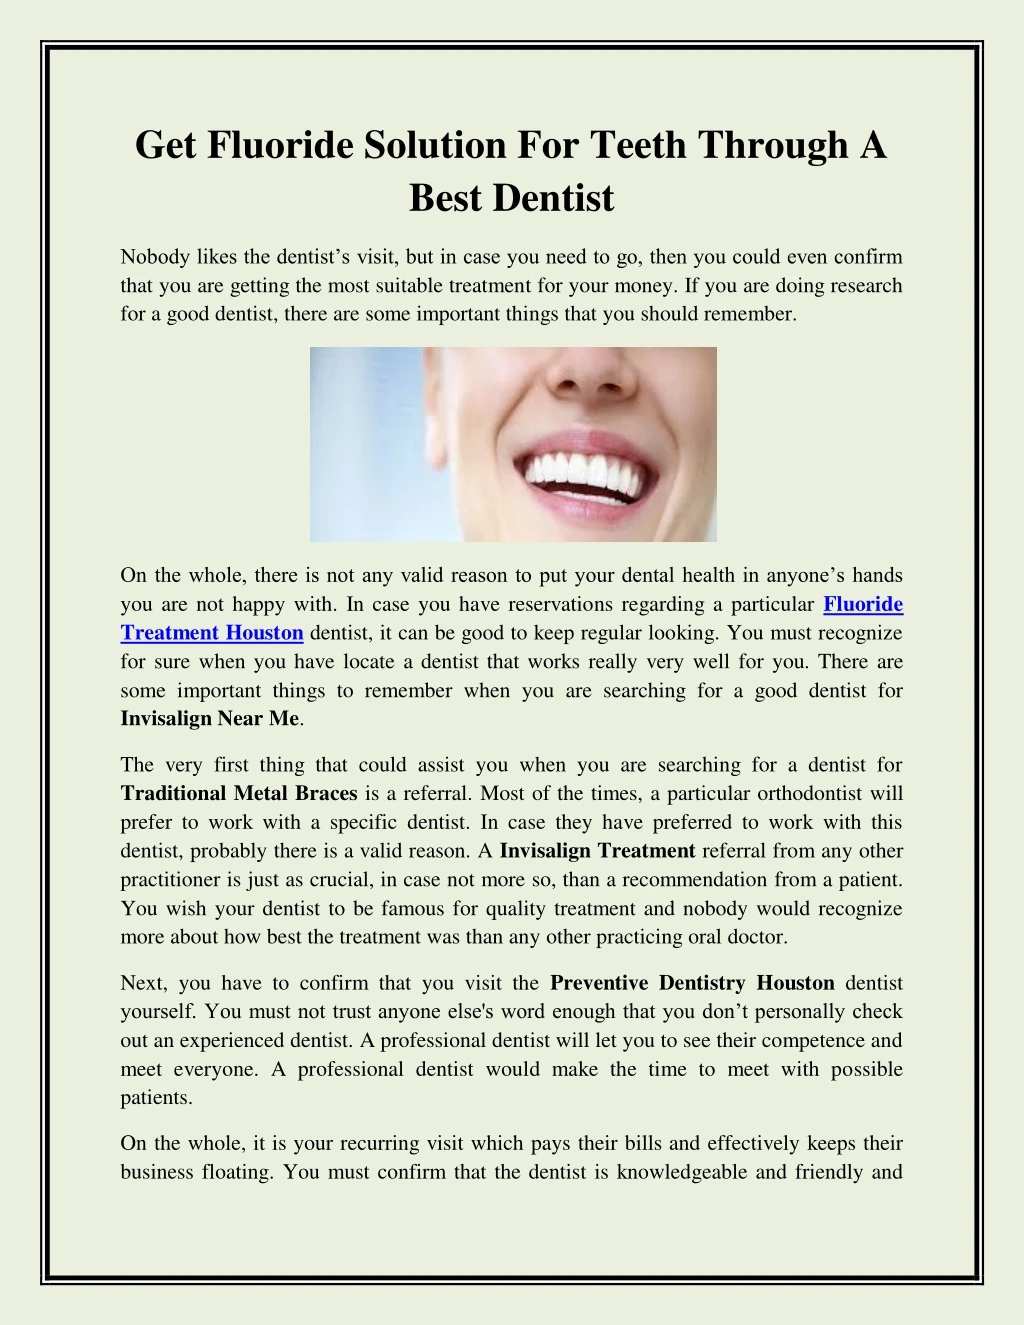 get fluoride solution for teeth through a best